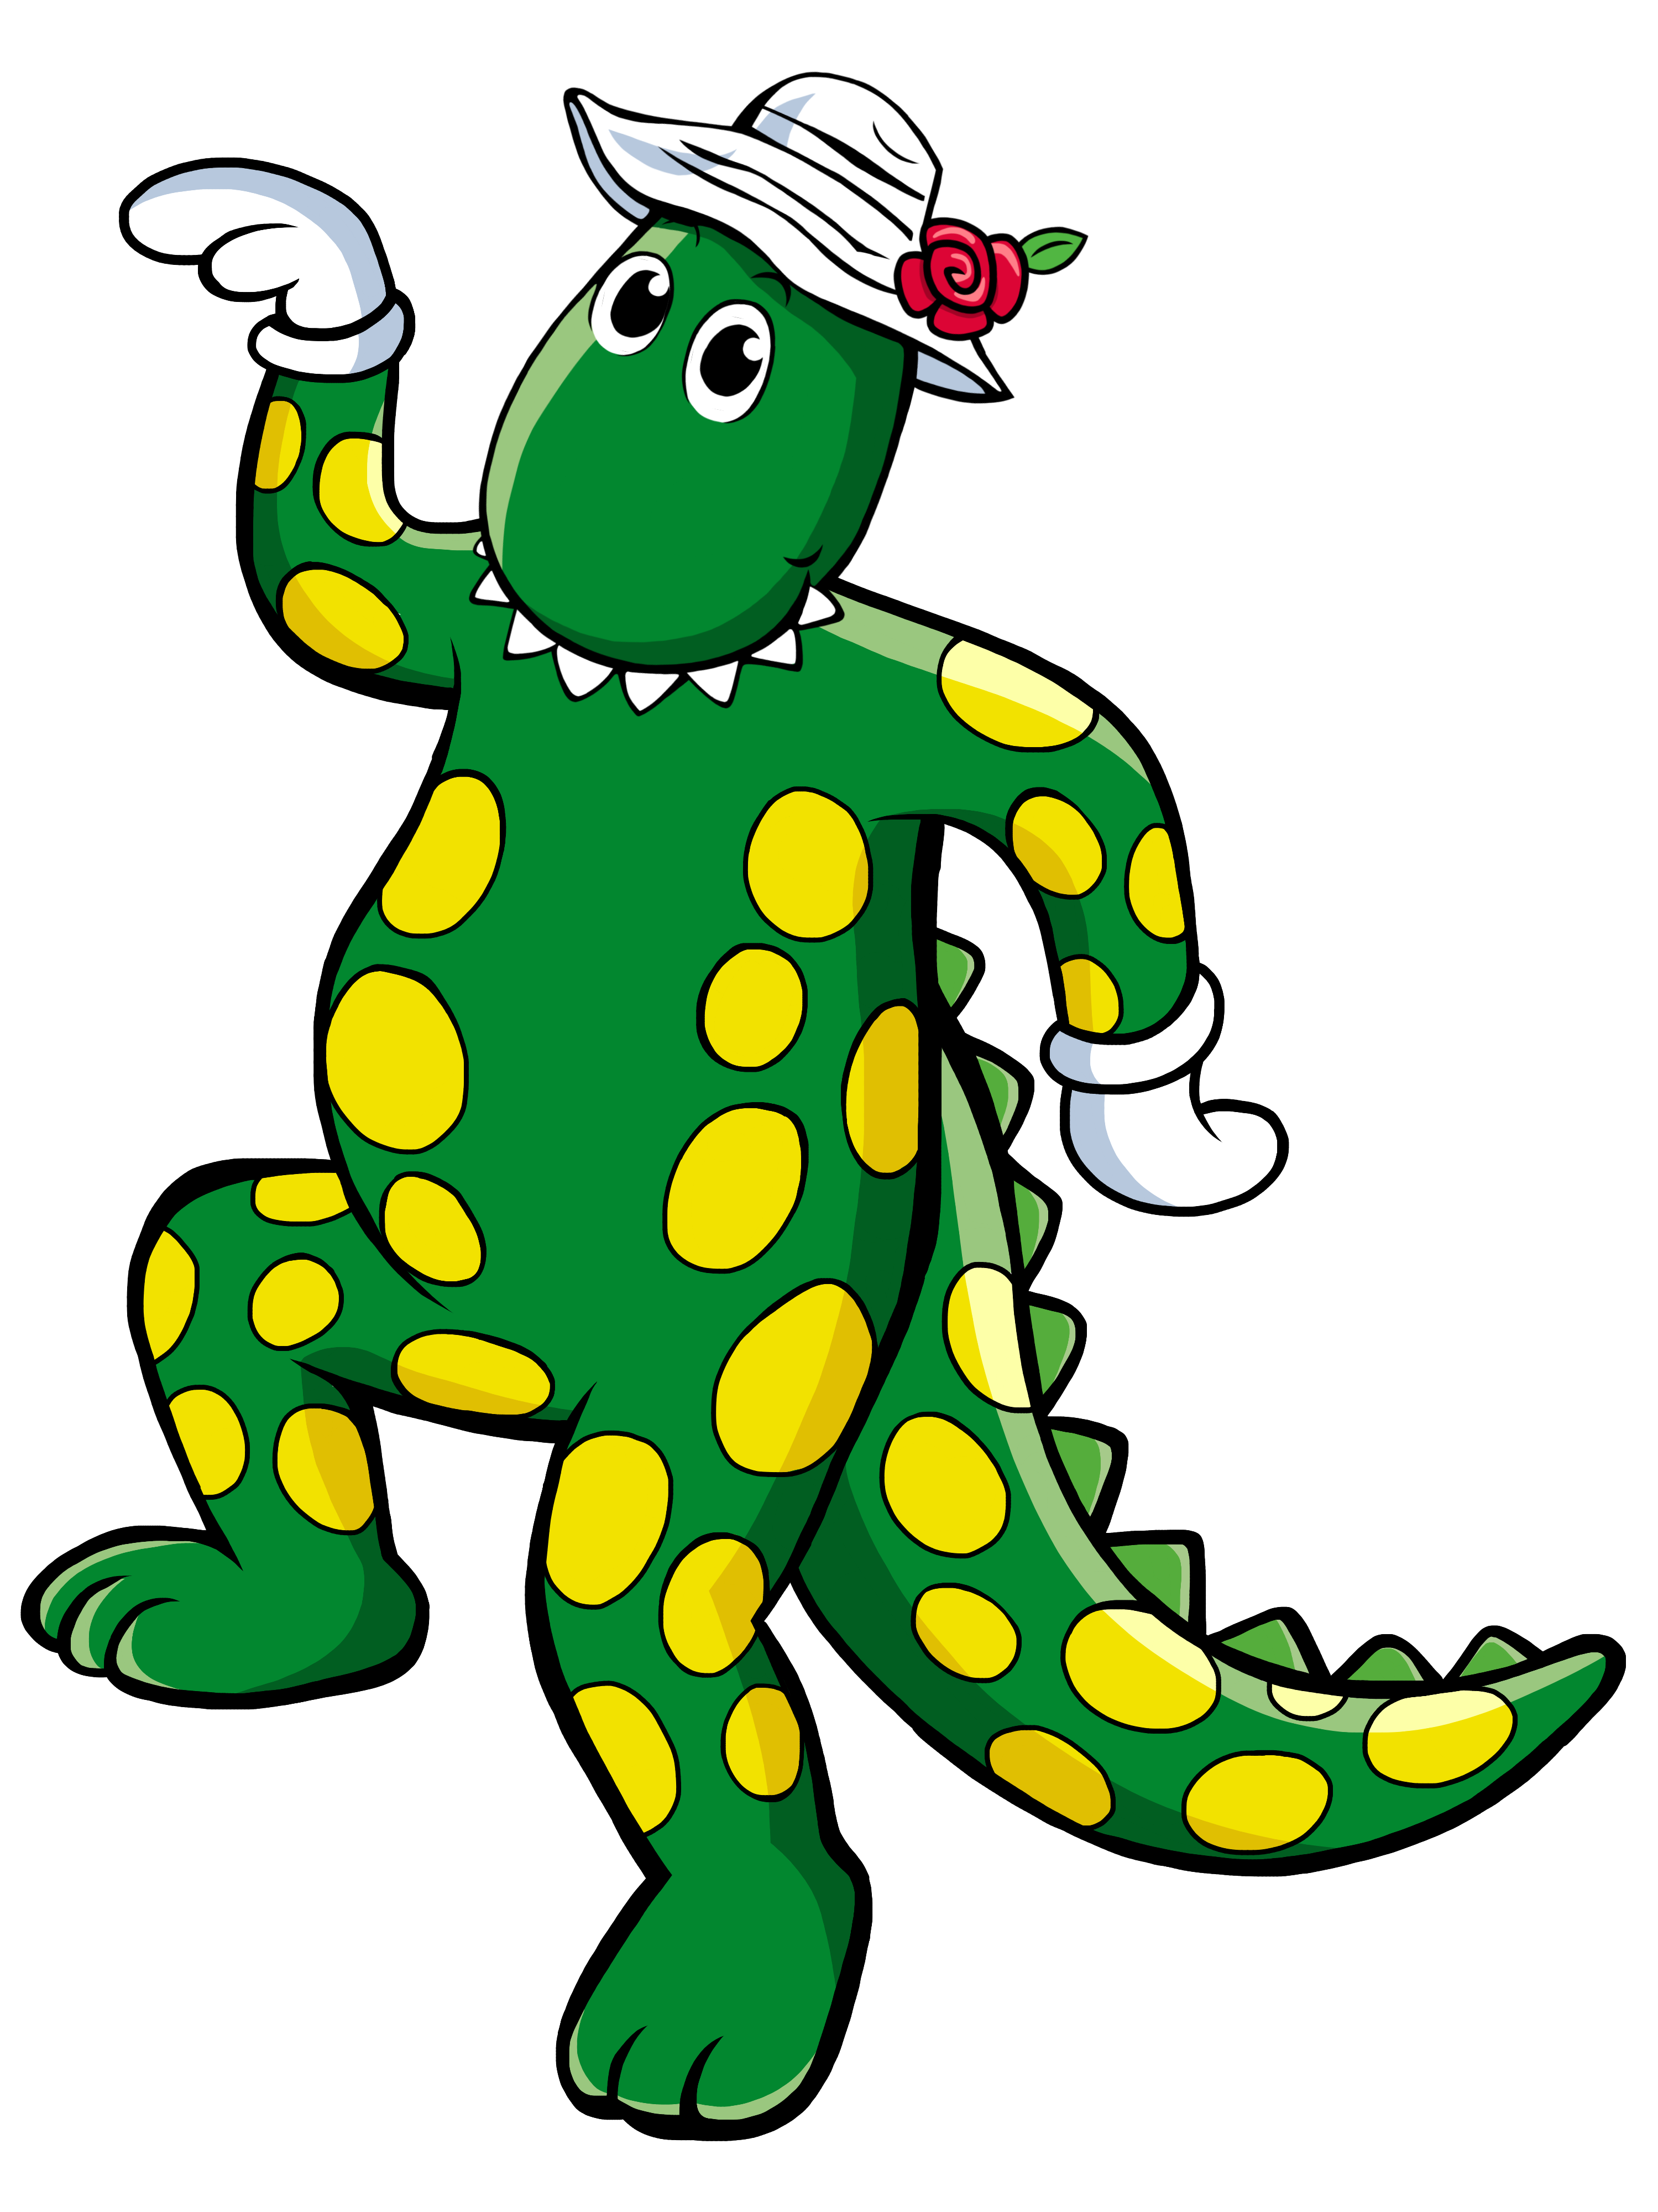 Dorothy the Dinosaur is Dancing PNG by seanscreations1 on DeviantArt